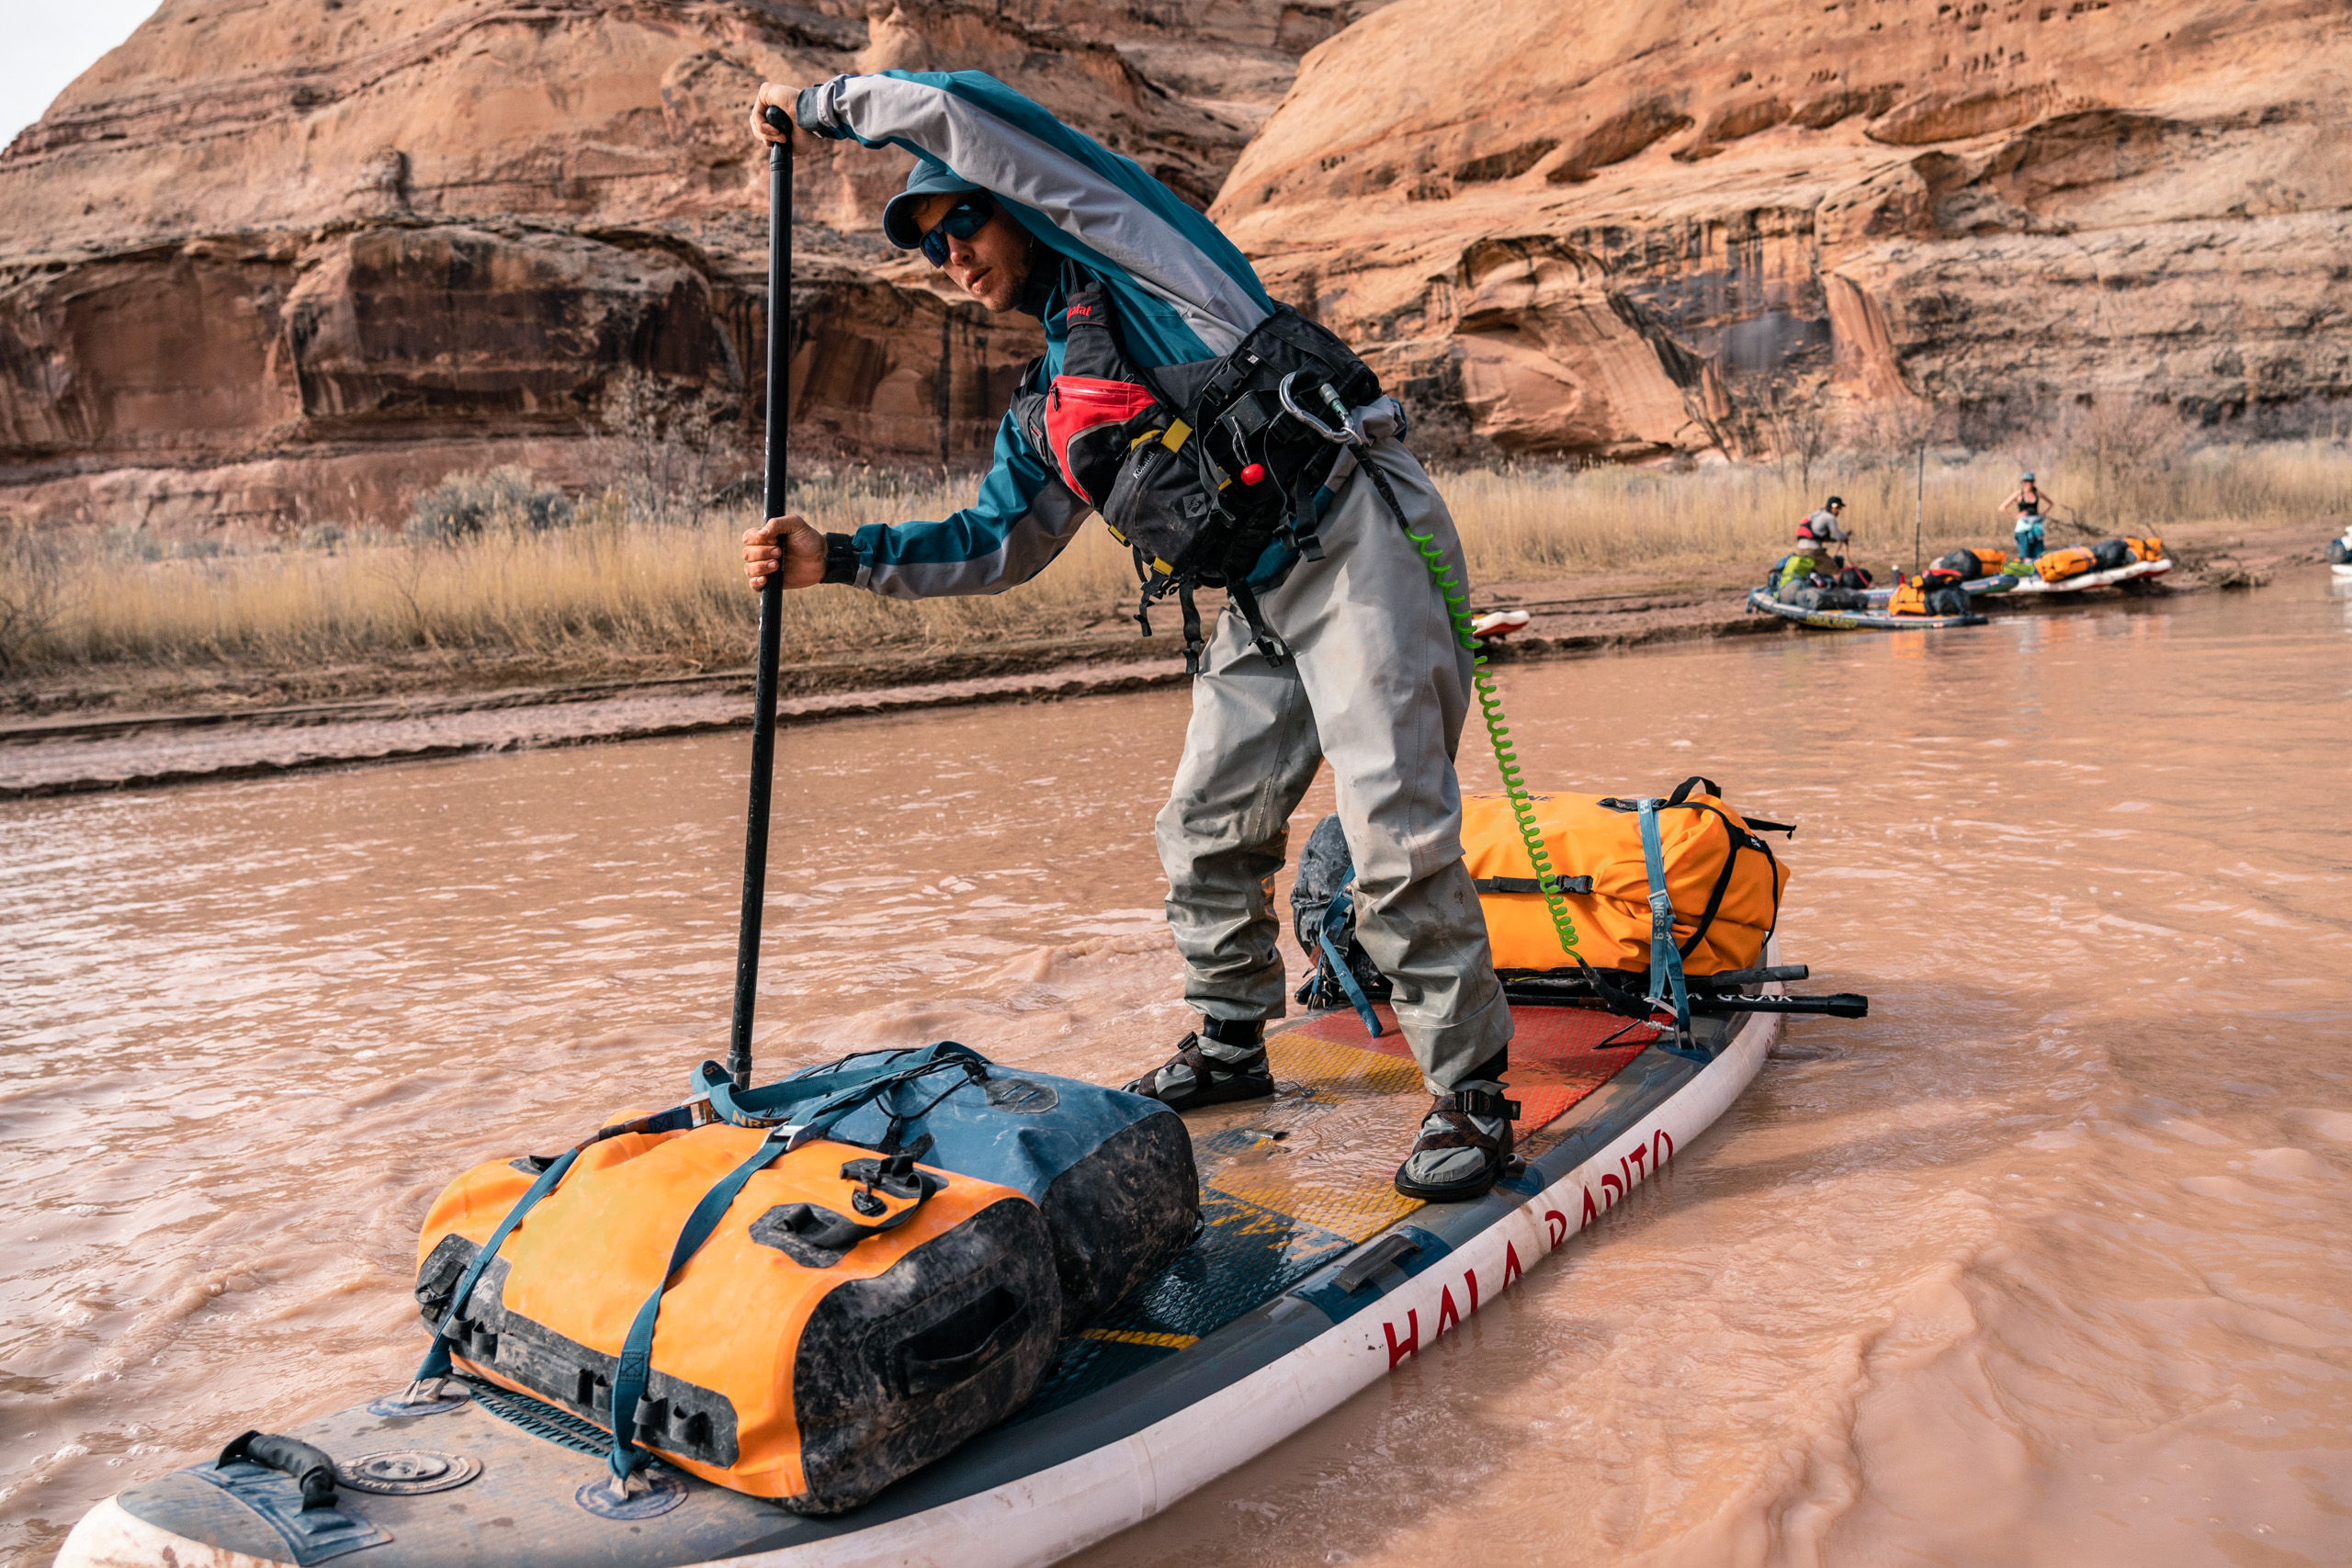 A man paddles a standup board loaded with SealLine bags